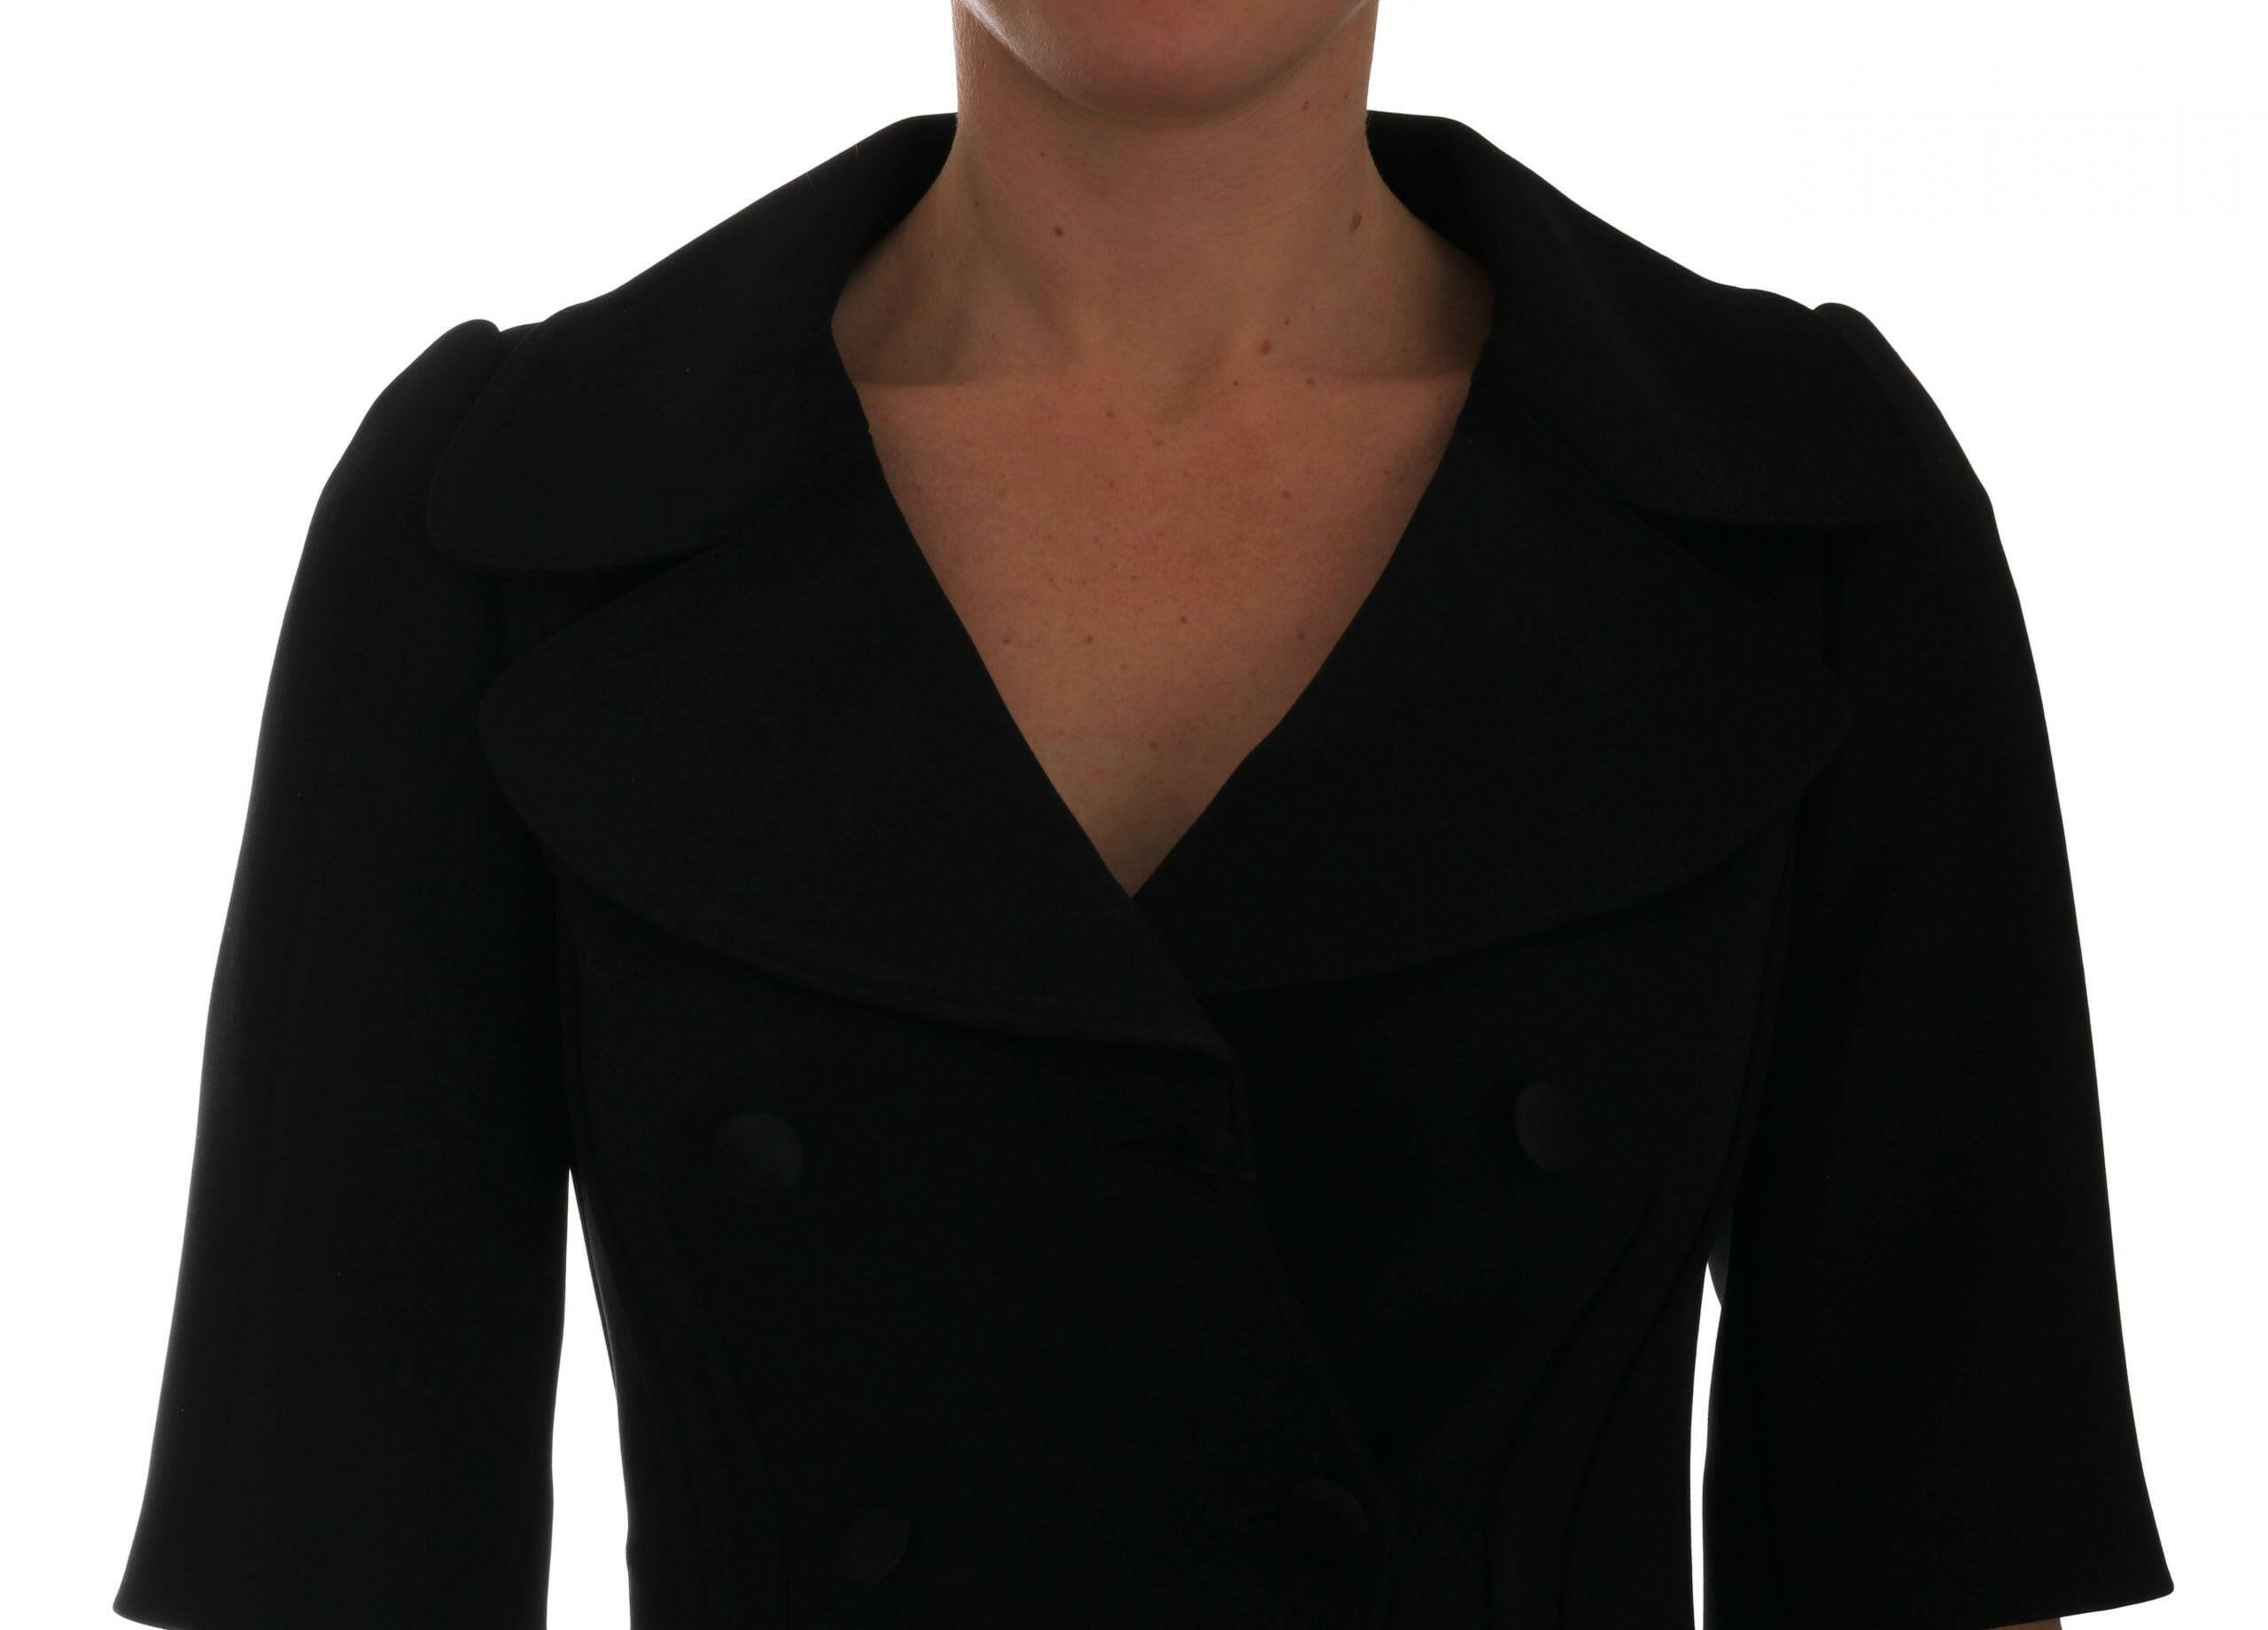 Dolce & Gabbana Chic Black Cropped Double Breasted Blazer.